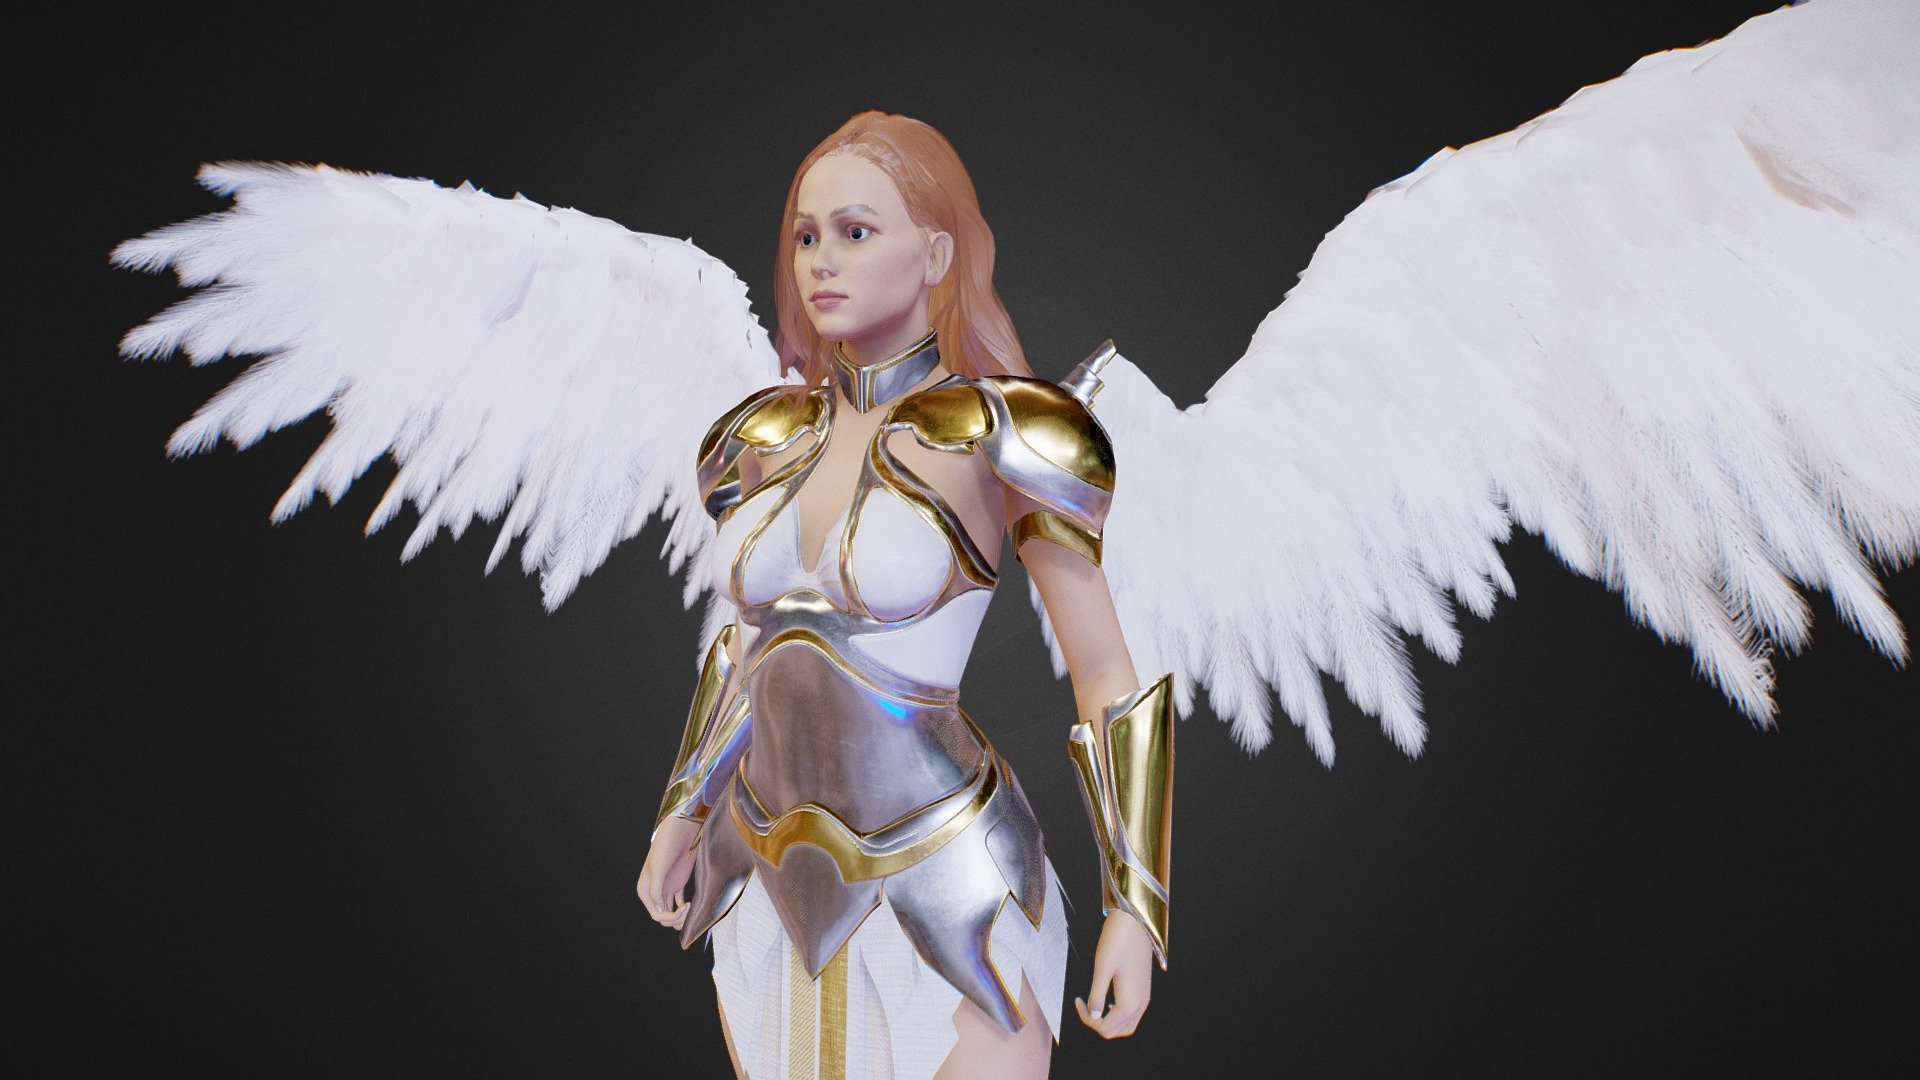 inspired by multipe concept arts an etherial angelic model for a female worrior with wings, using blender, zbrush and substance painter _ in the files you can find the rigged and animated model in Blend Format. all details were backed on a low poly version which made game ready and suitable for game rendering.

On Cycles Render:
 - Etherial Angelic Female Warrior - Buy Royalty Free 3D model by Sam_Kasrawi 3d model